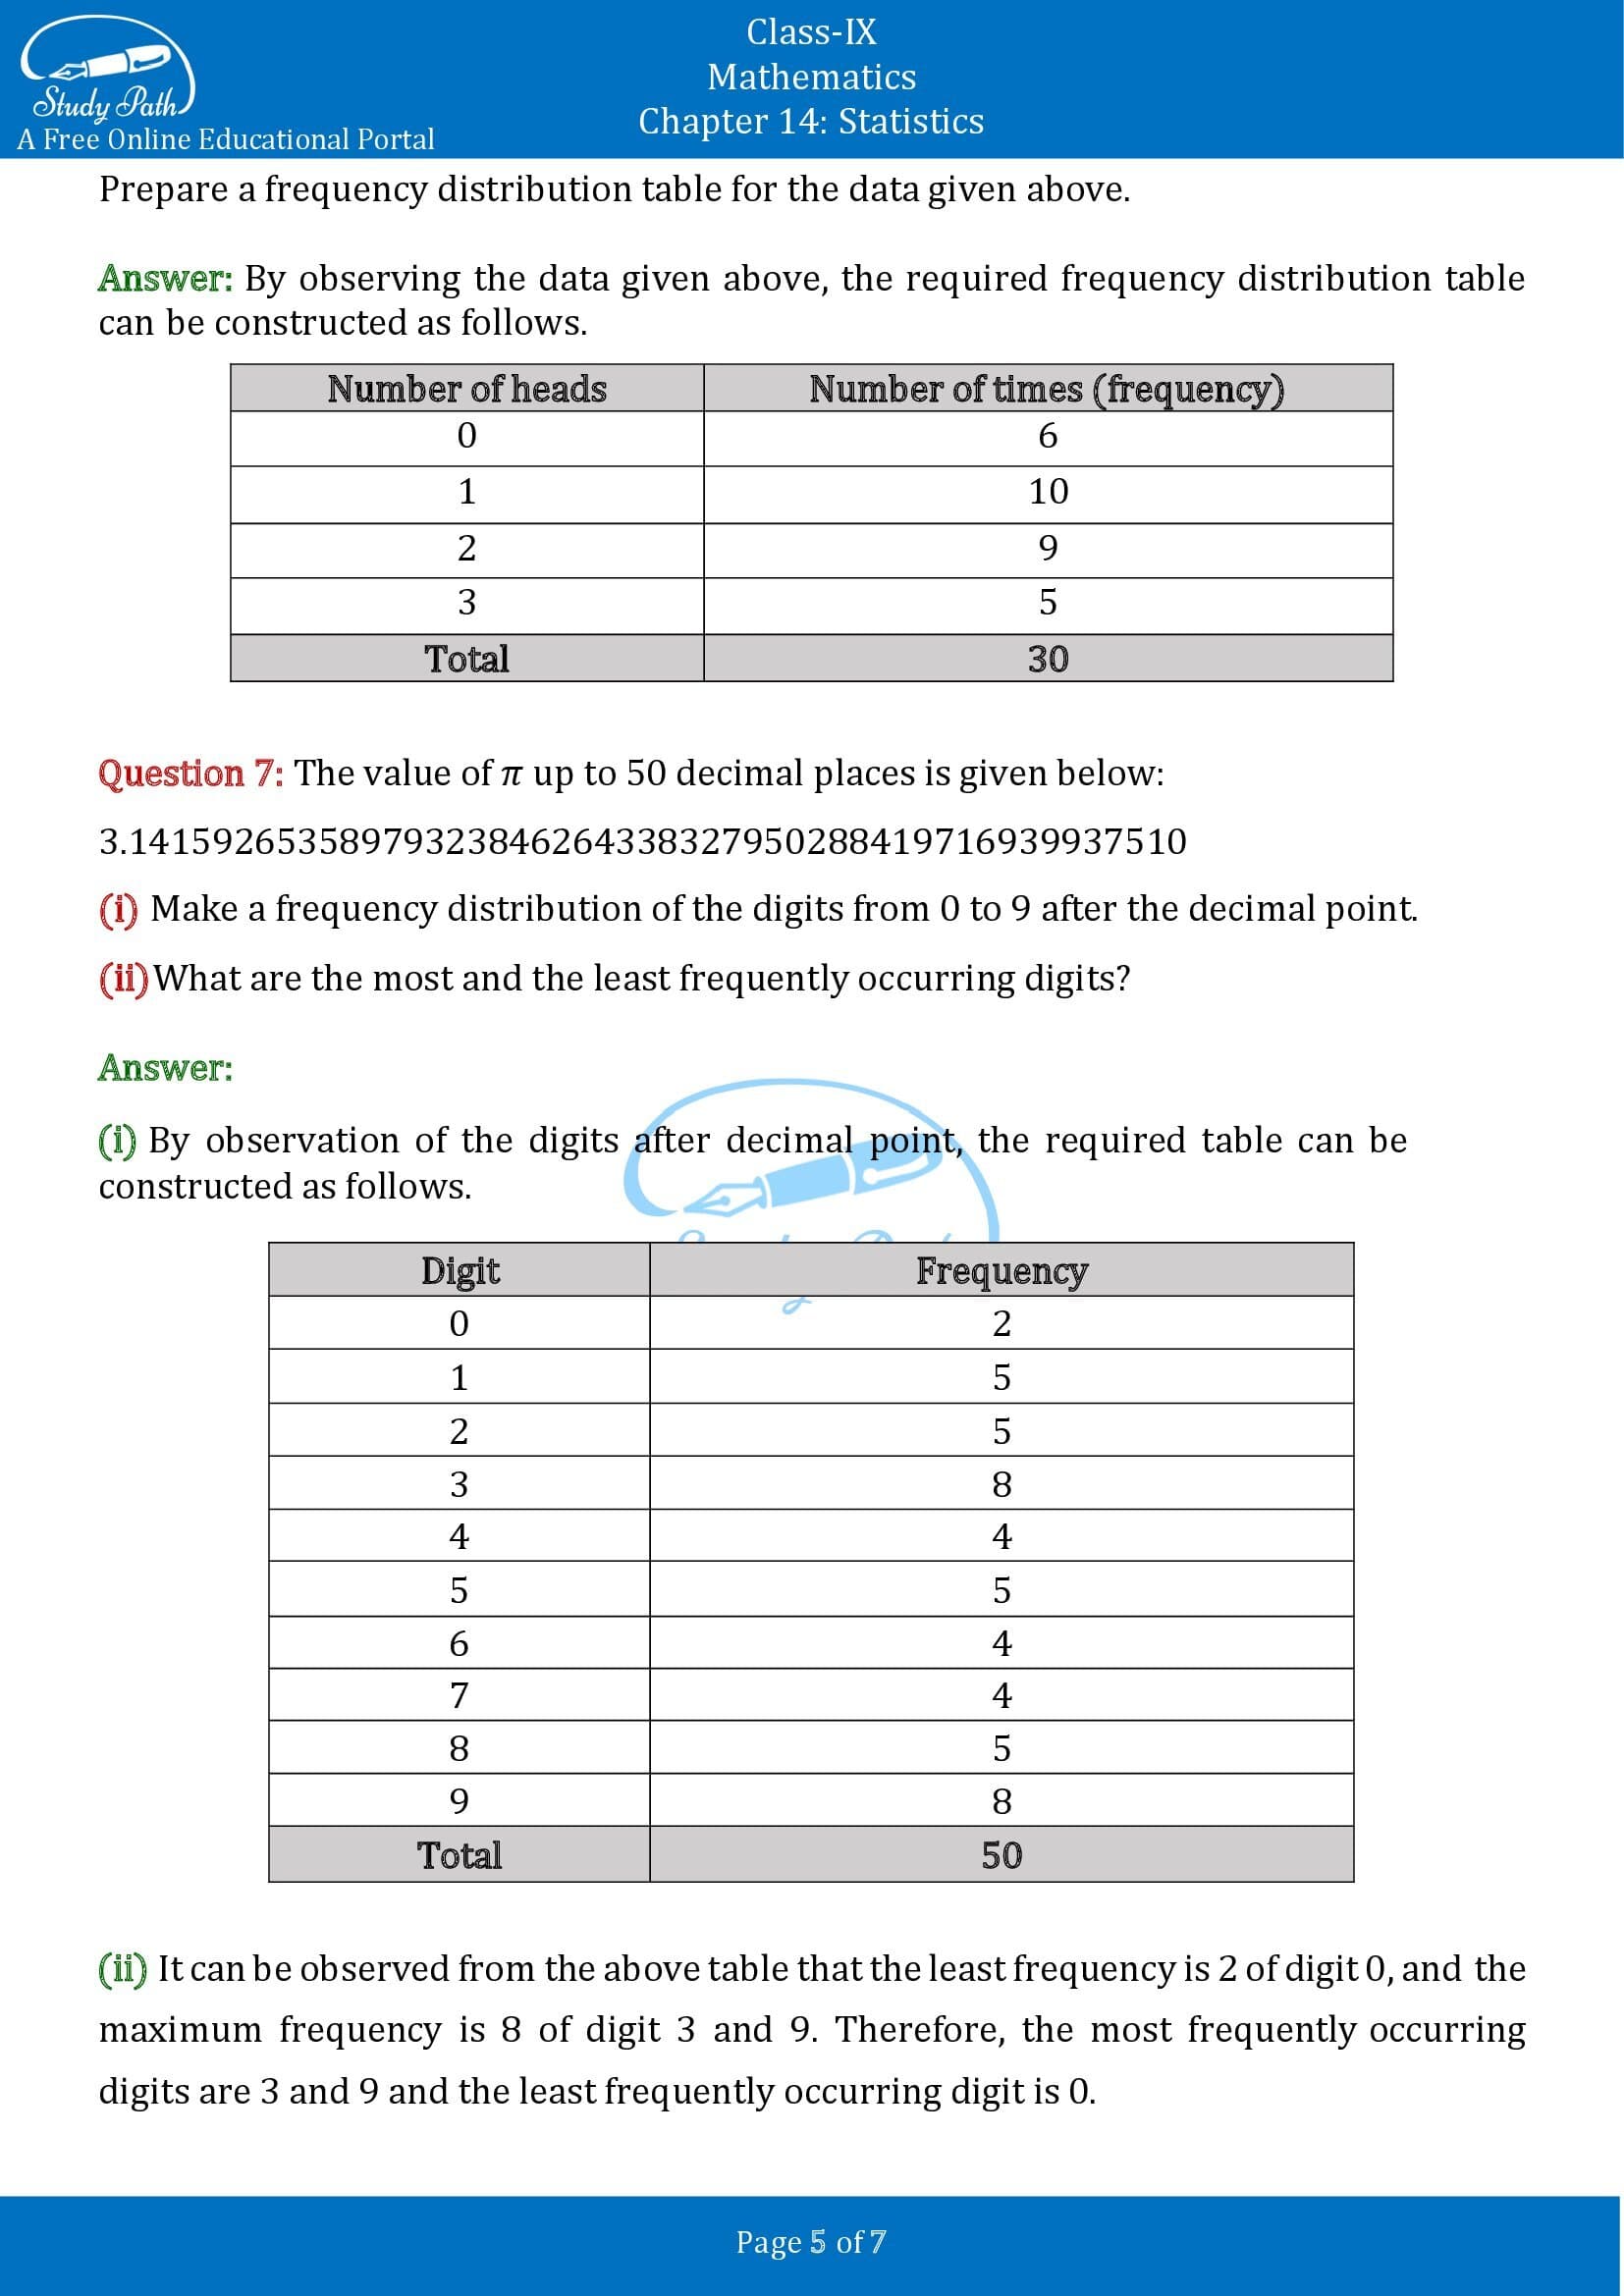 NCERT Solutions for Class 9 Maths Chapter 14 Statistics Exercise 14.2 00005